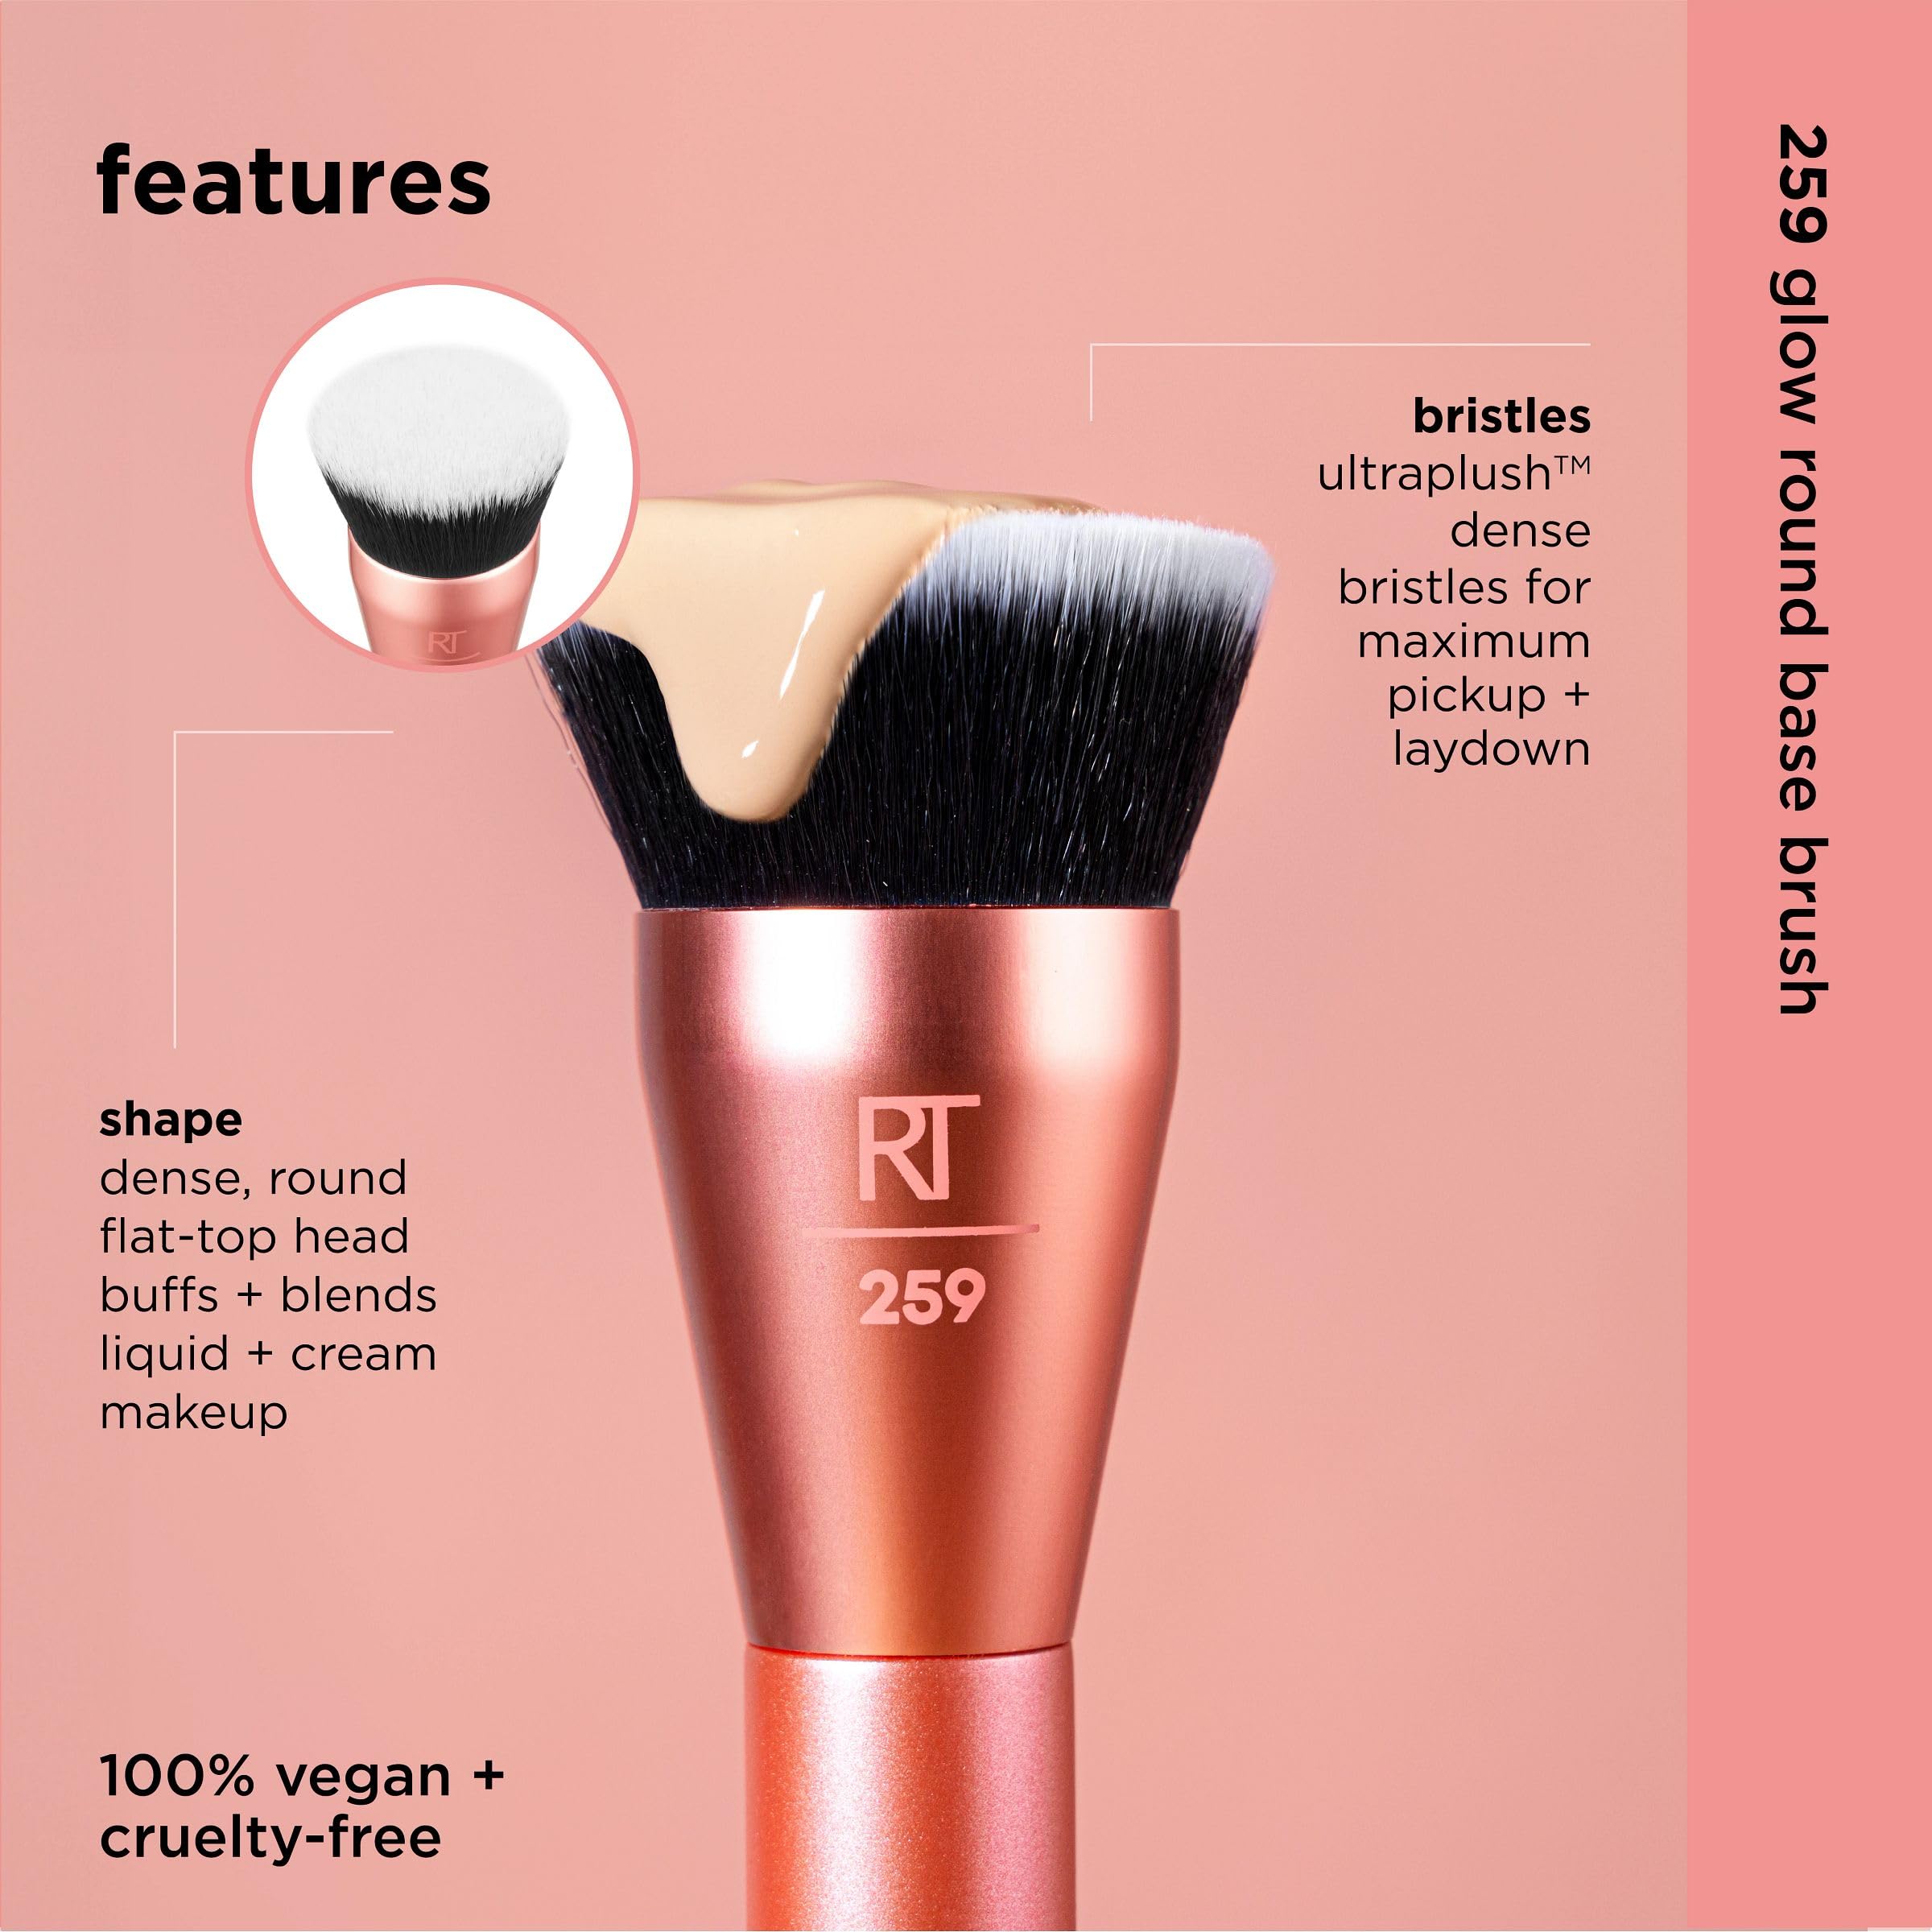 Real Techniques Glow Round Base Makeup Brush, For Liquid & Cream Makeup, Flat Top Foundation Brush For Buffing & Blending, Dense Synthetic Bristles, Vegan & Cruelty Free, 1 Count